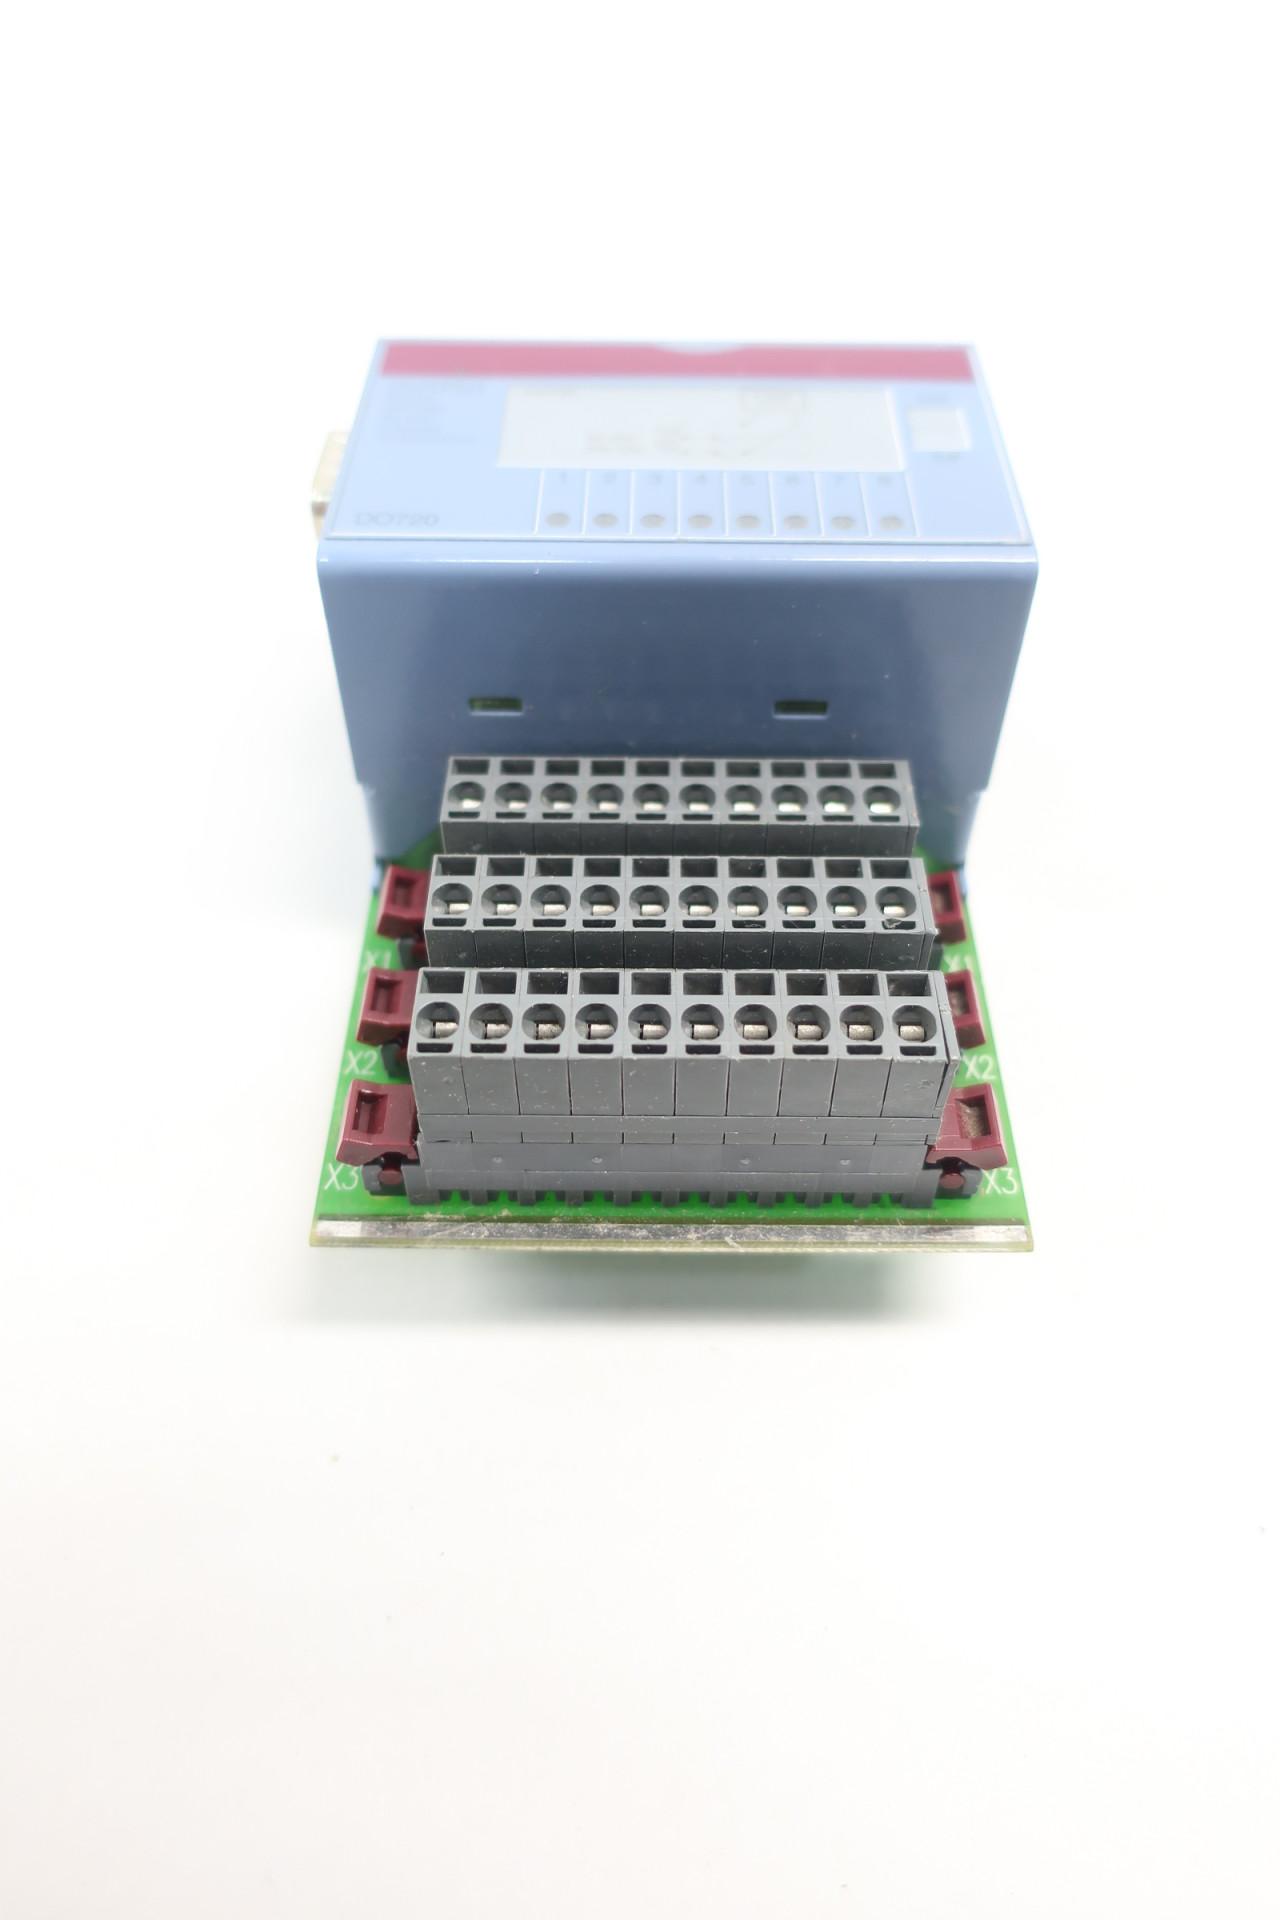 DO720 output module Details about   B&R Automation 7DO720.7 2 Year Warranty 